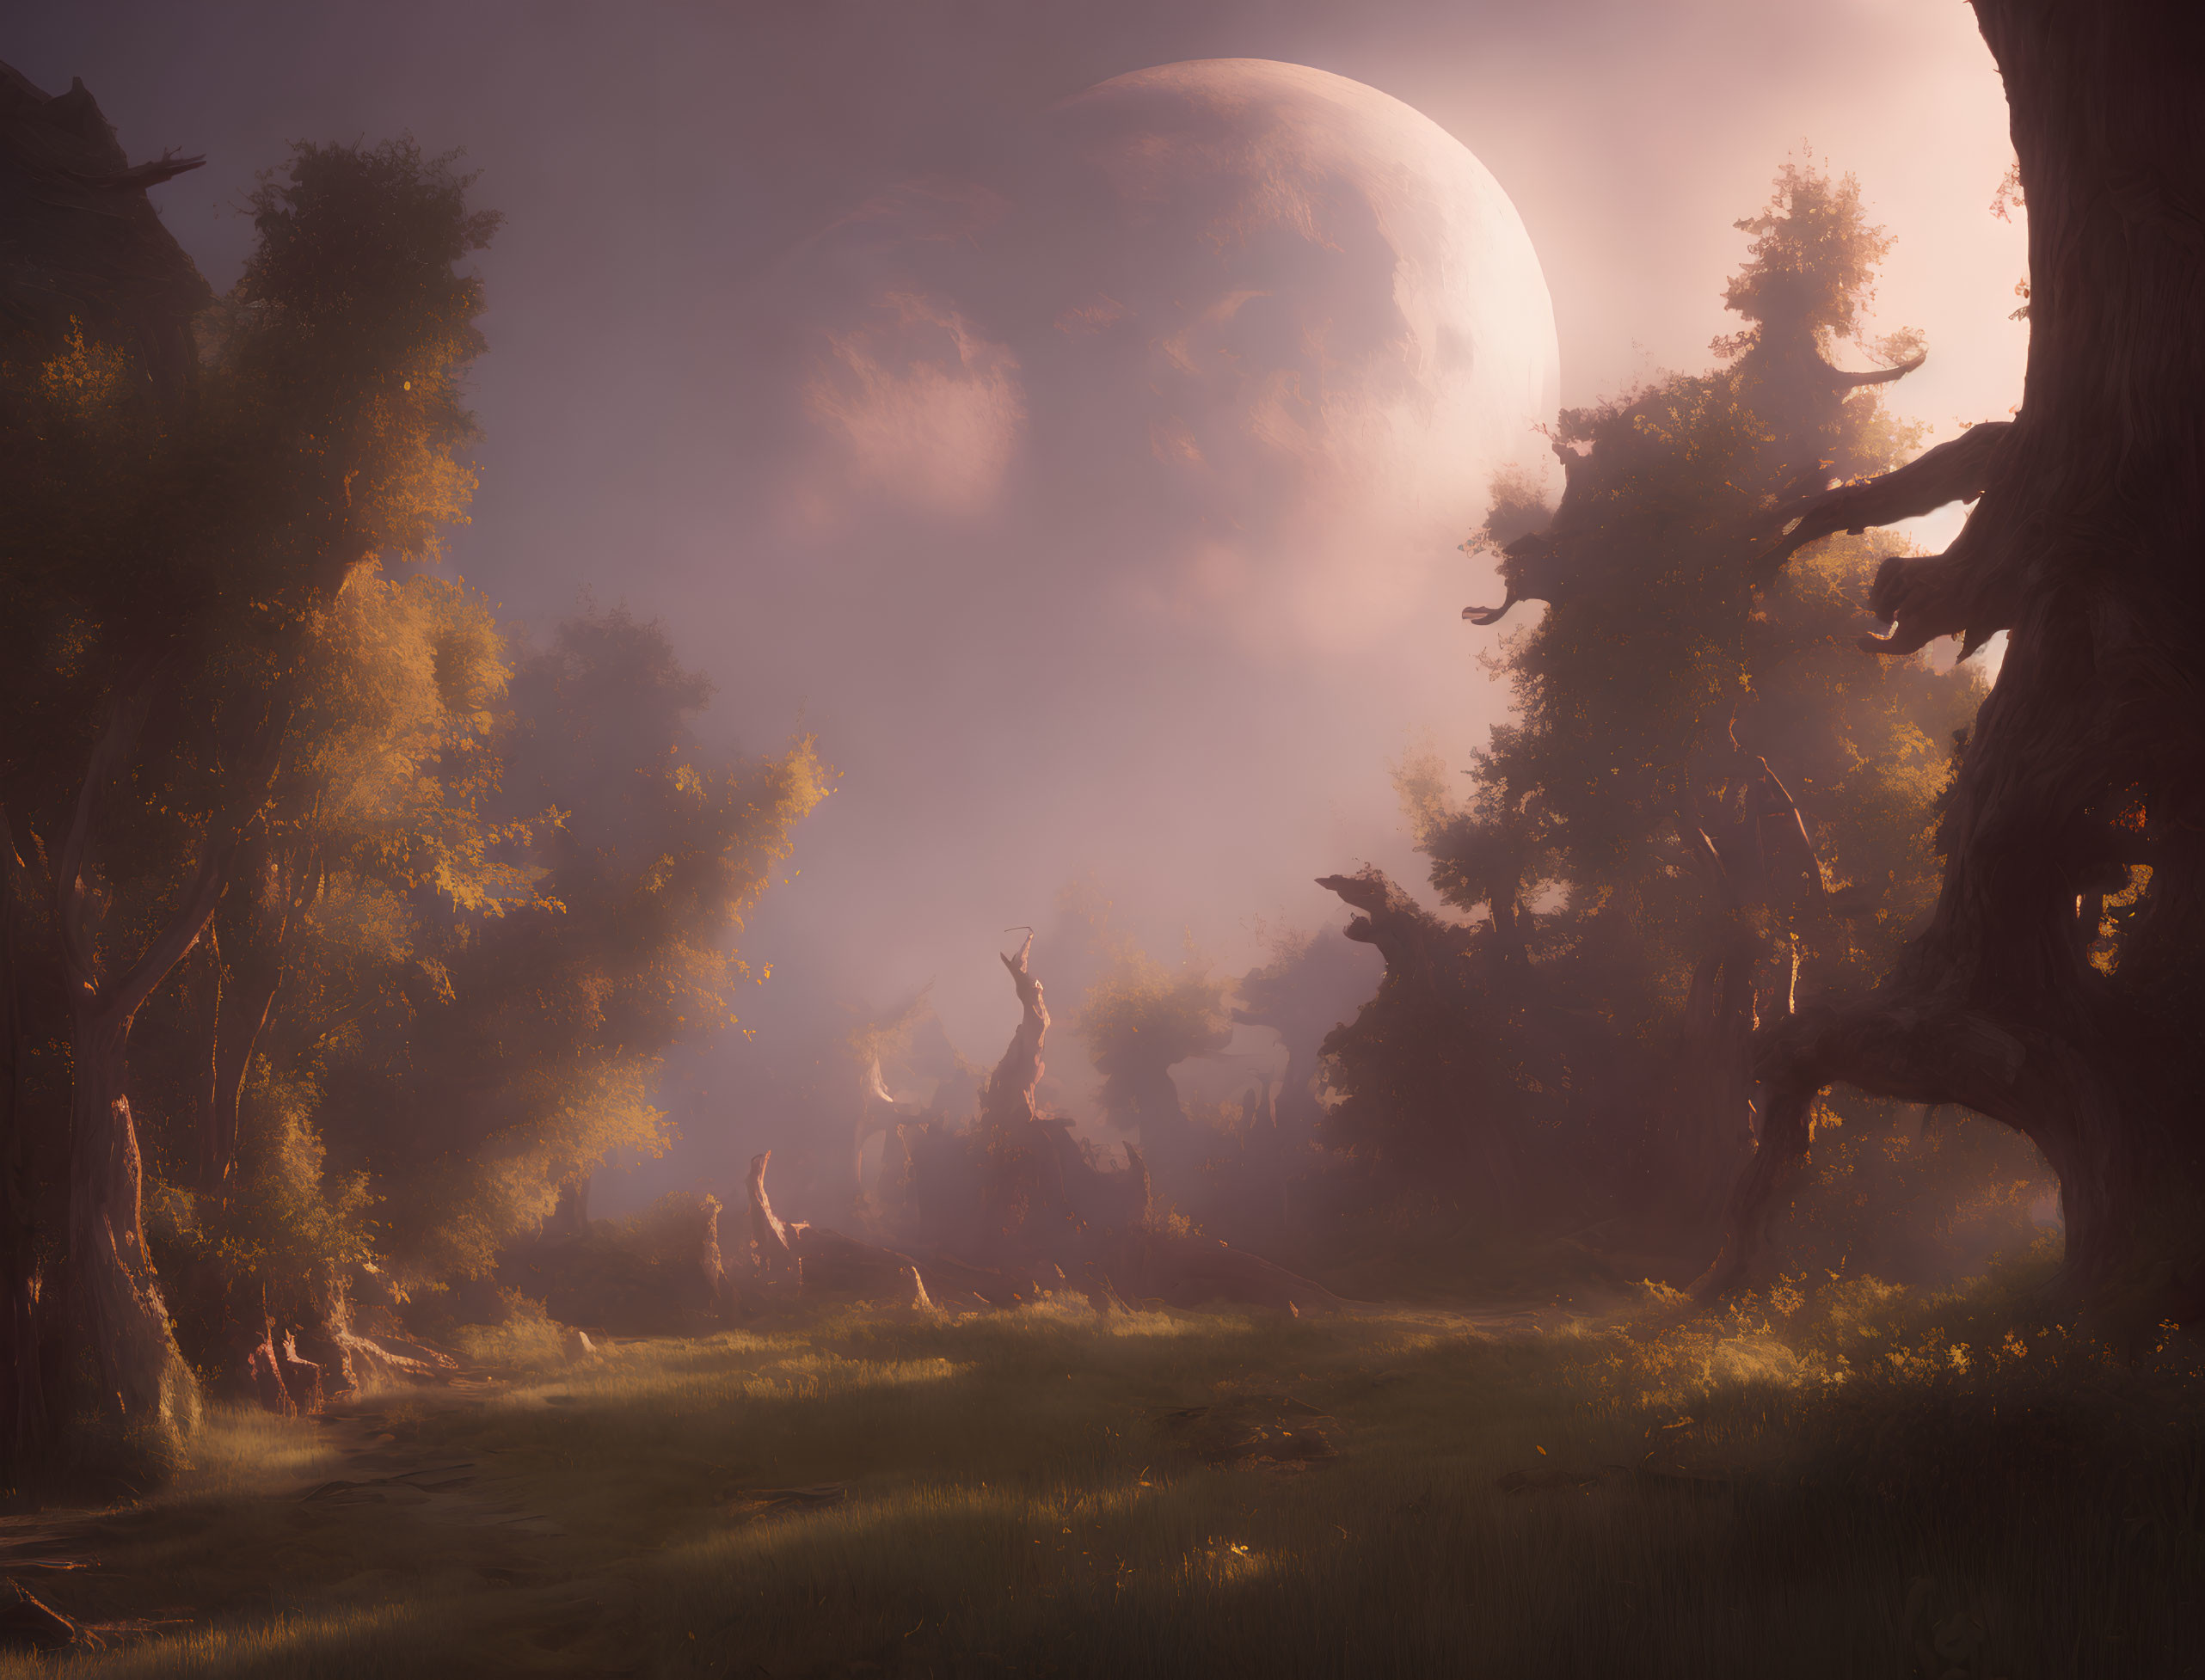 Enchanting forest scene with towering trees and large moon